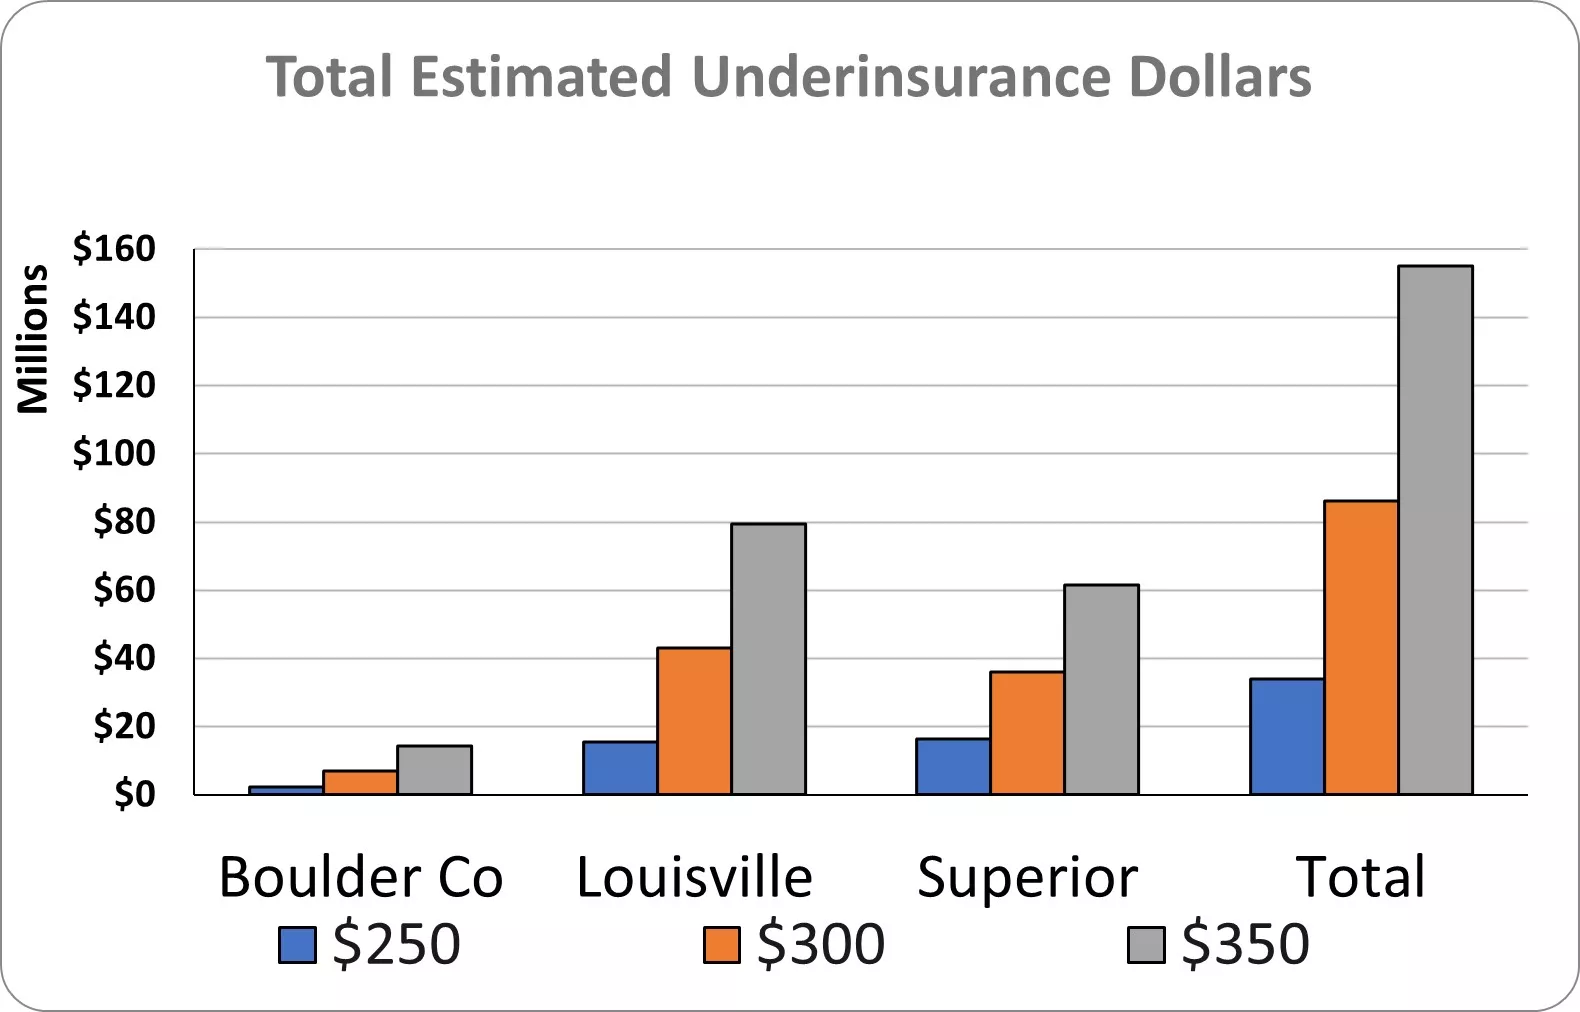 Total Estimated Underinsurance Amount -  At $250 per square foot rebuild costs, the estimated total amount of underinsurance is $34 million; at $300 per square foot rebuild costs, the estimated total amount of underinsurance is $86 million; at $350 per square foot rebuild costs, the estimated total amount of underinsurance is $155 million.